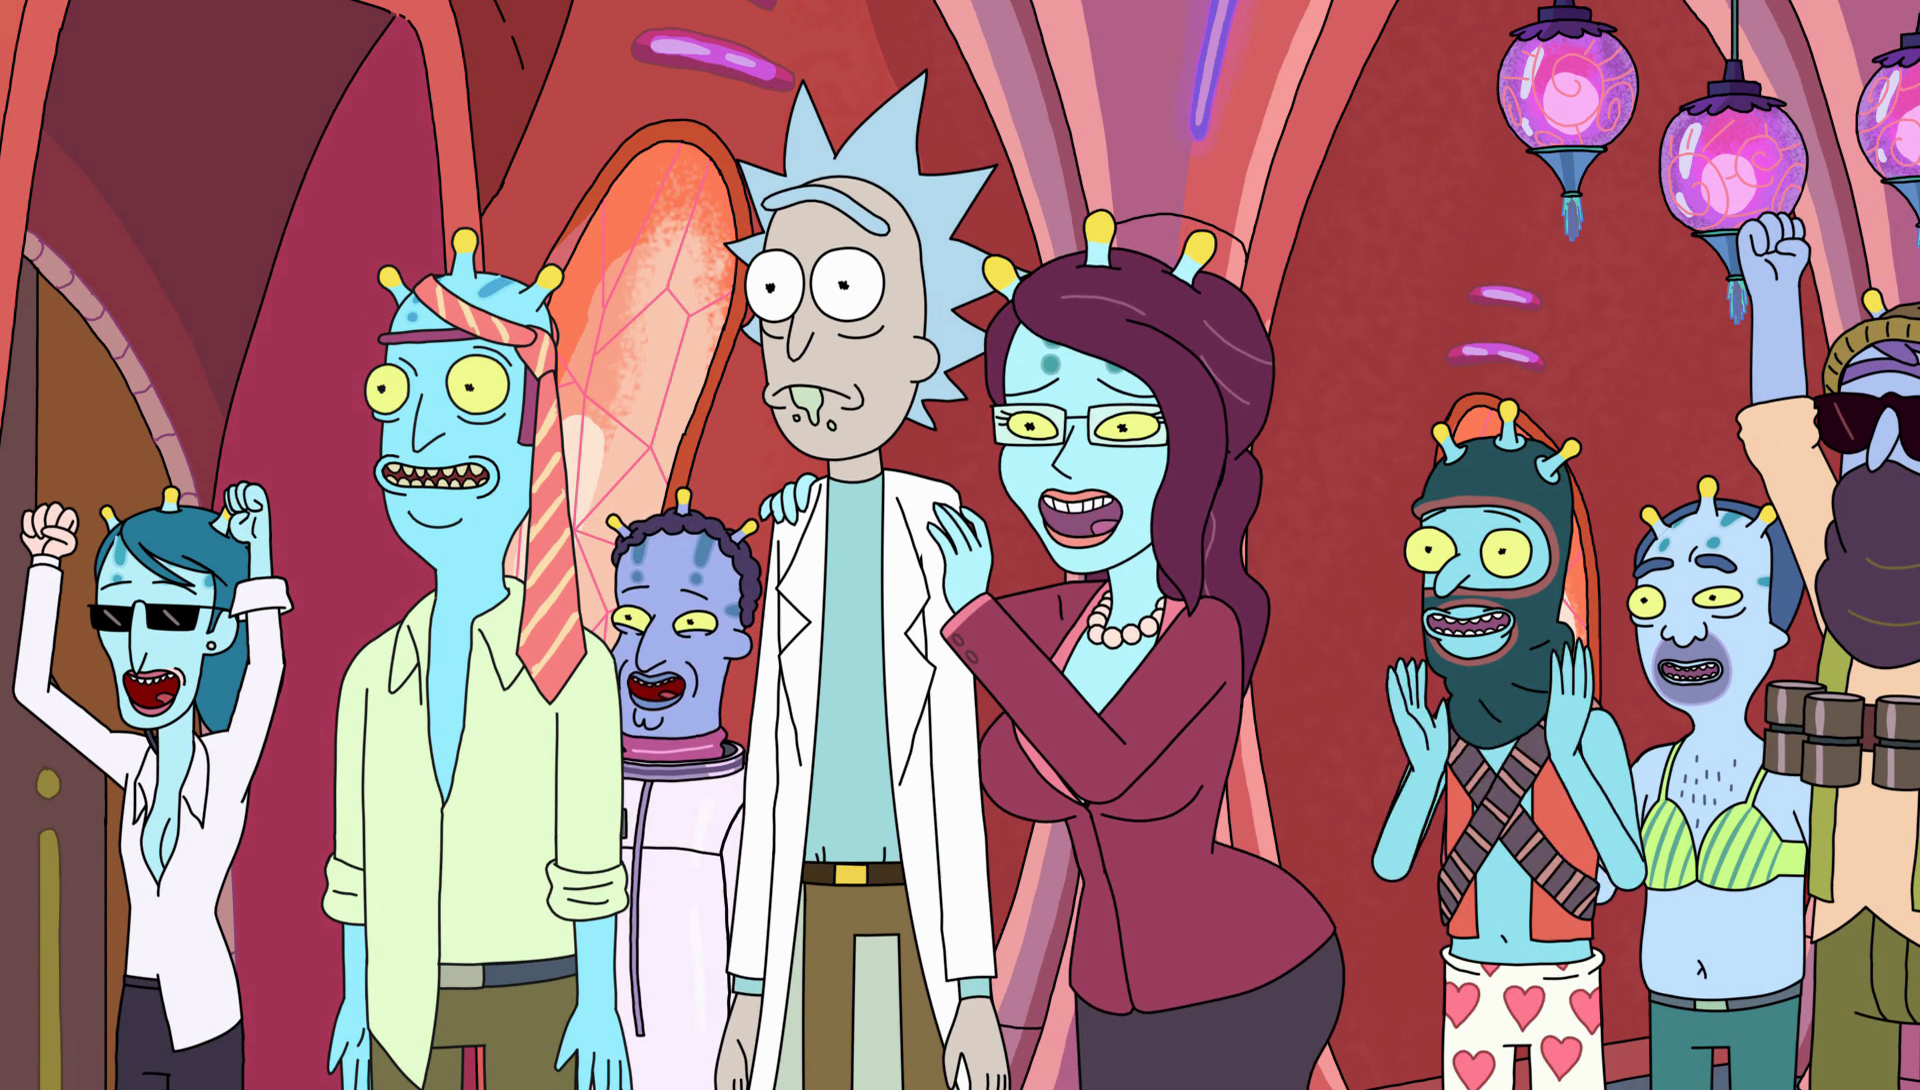 Rick and UNITY and other alien forms cheering for something, Rick is worrie...